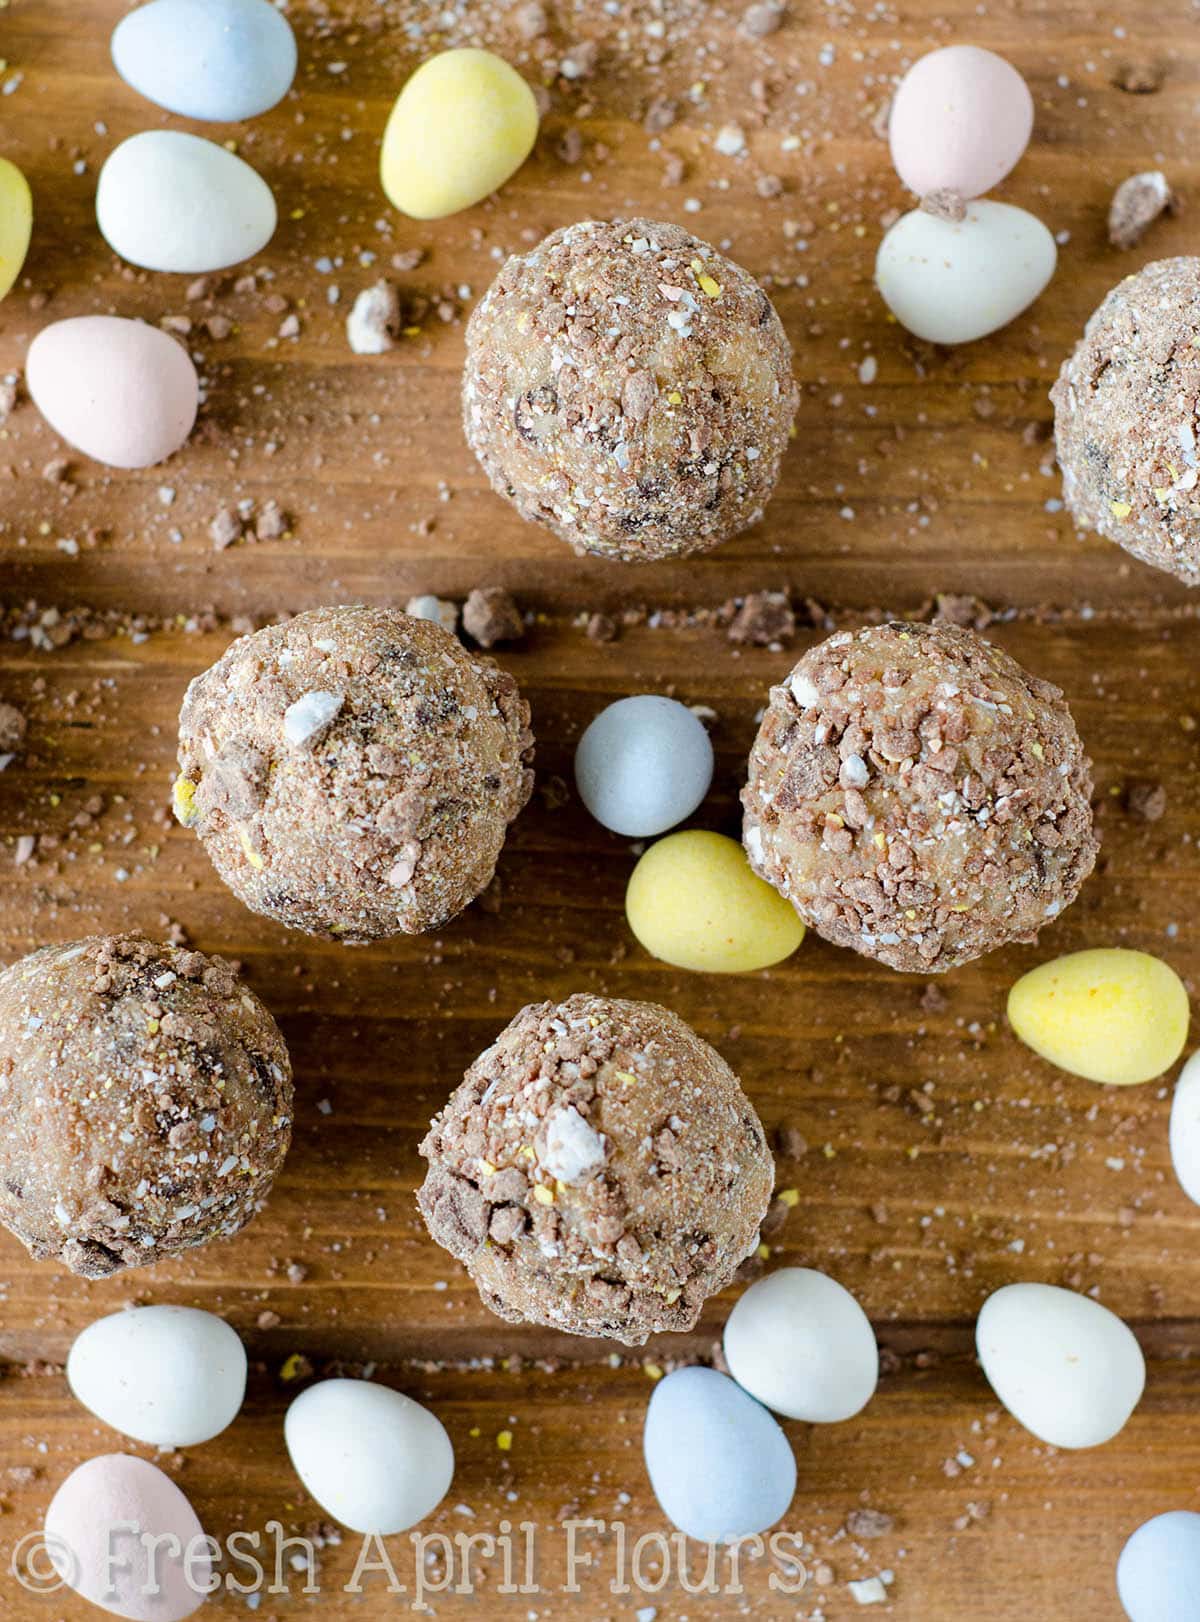 Chocolate Chip Mini Egg Cookie Dough Bites: Eggless and safe-to-eat chocolate chip cookie dough balls filled and coated with crunchy pieces of Cadbury Mini Eggs. The perfect treat for Easter!